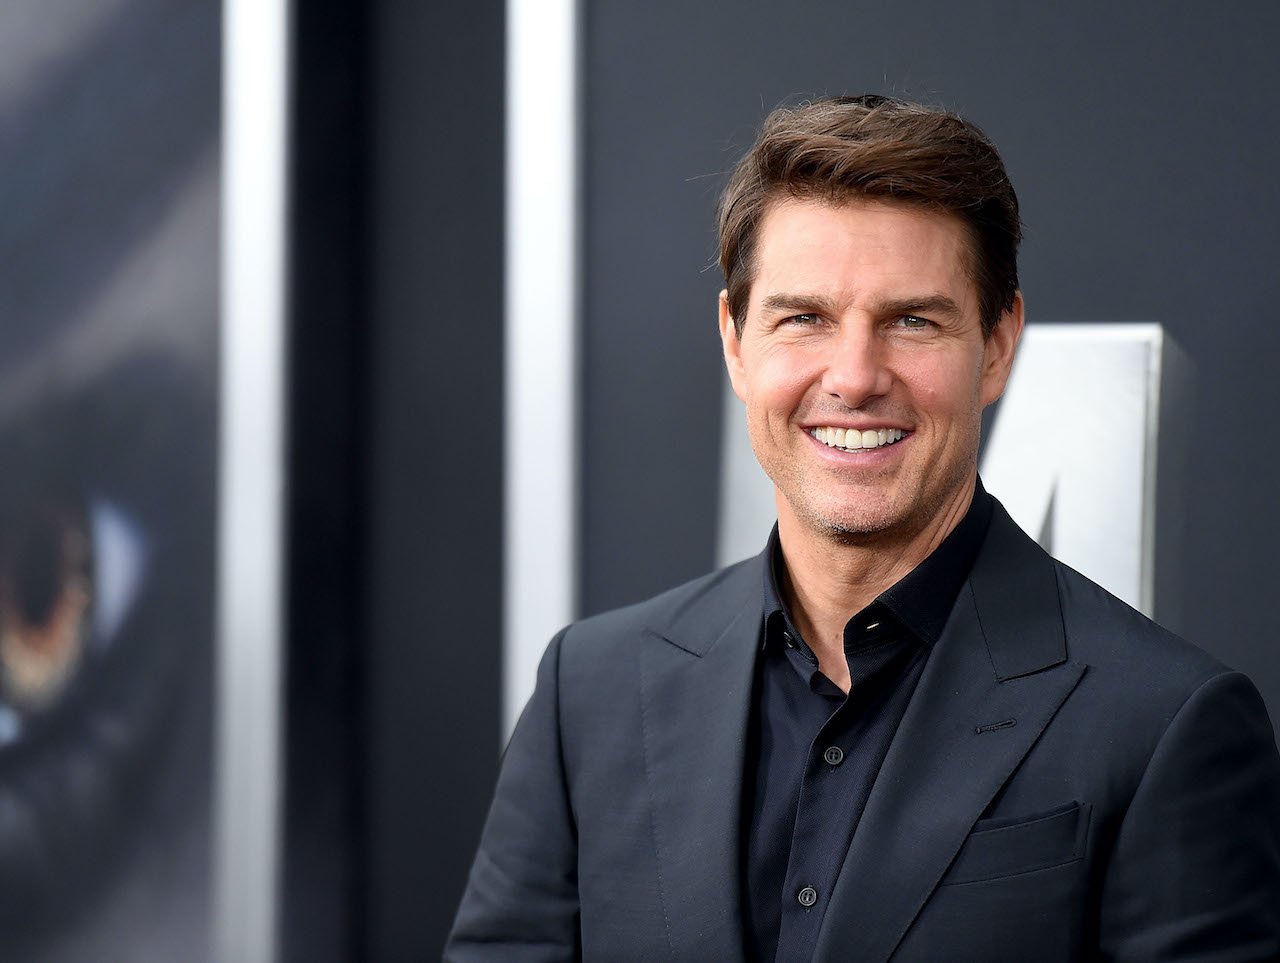 Tom cruise attends the "The Mummy" New York Fan Eventat AMC Loews Lincoln Square